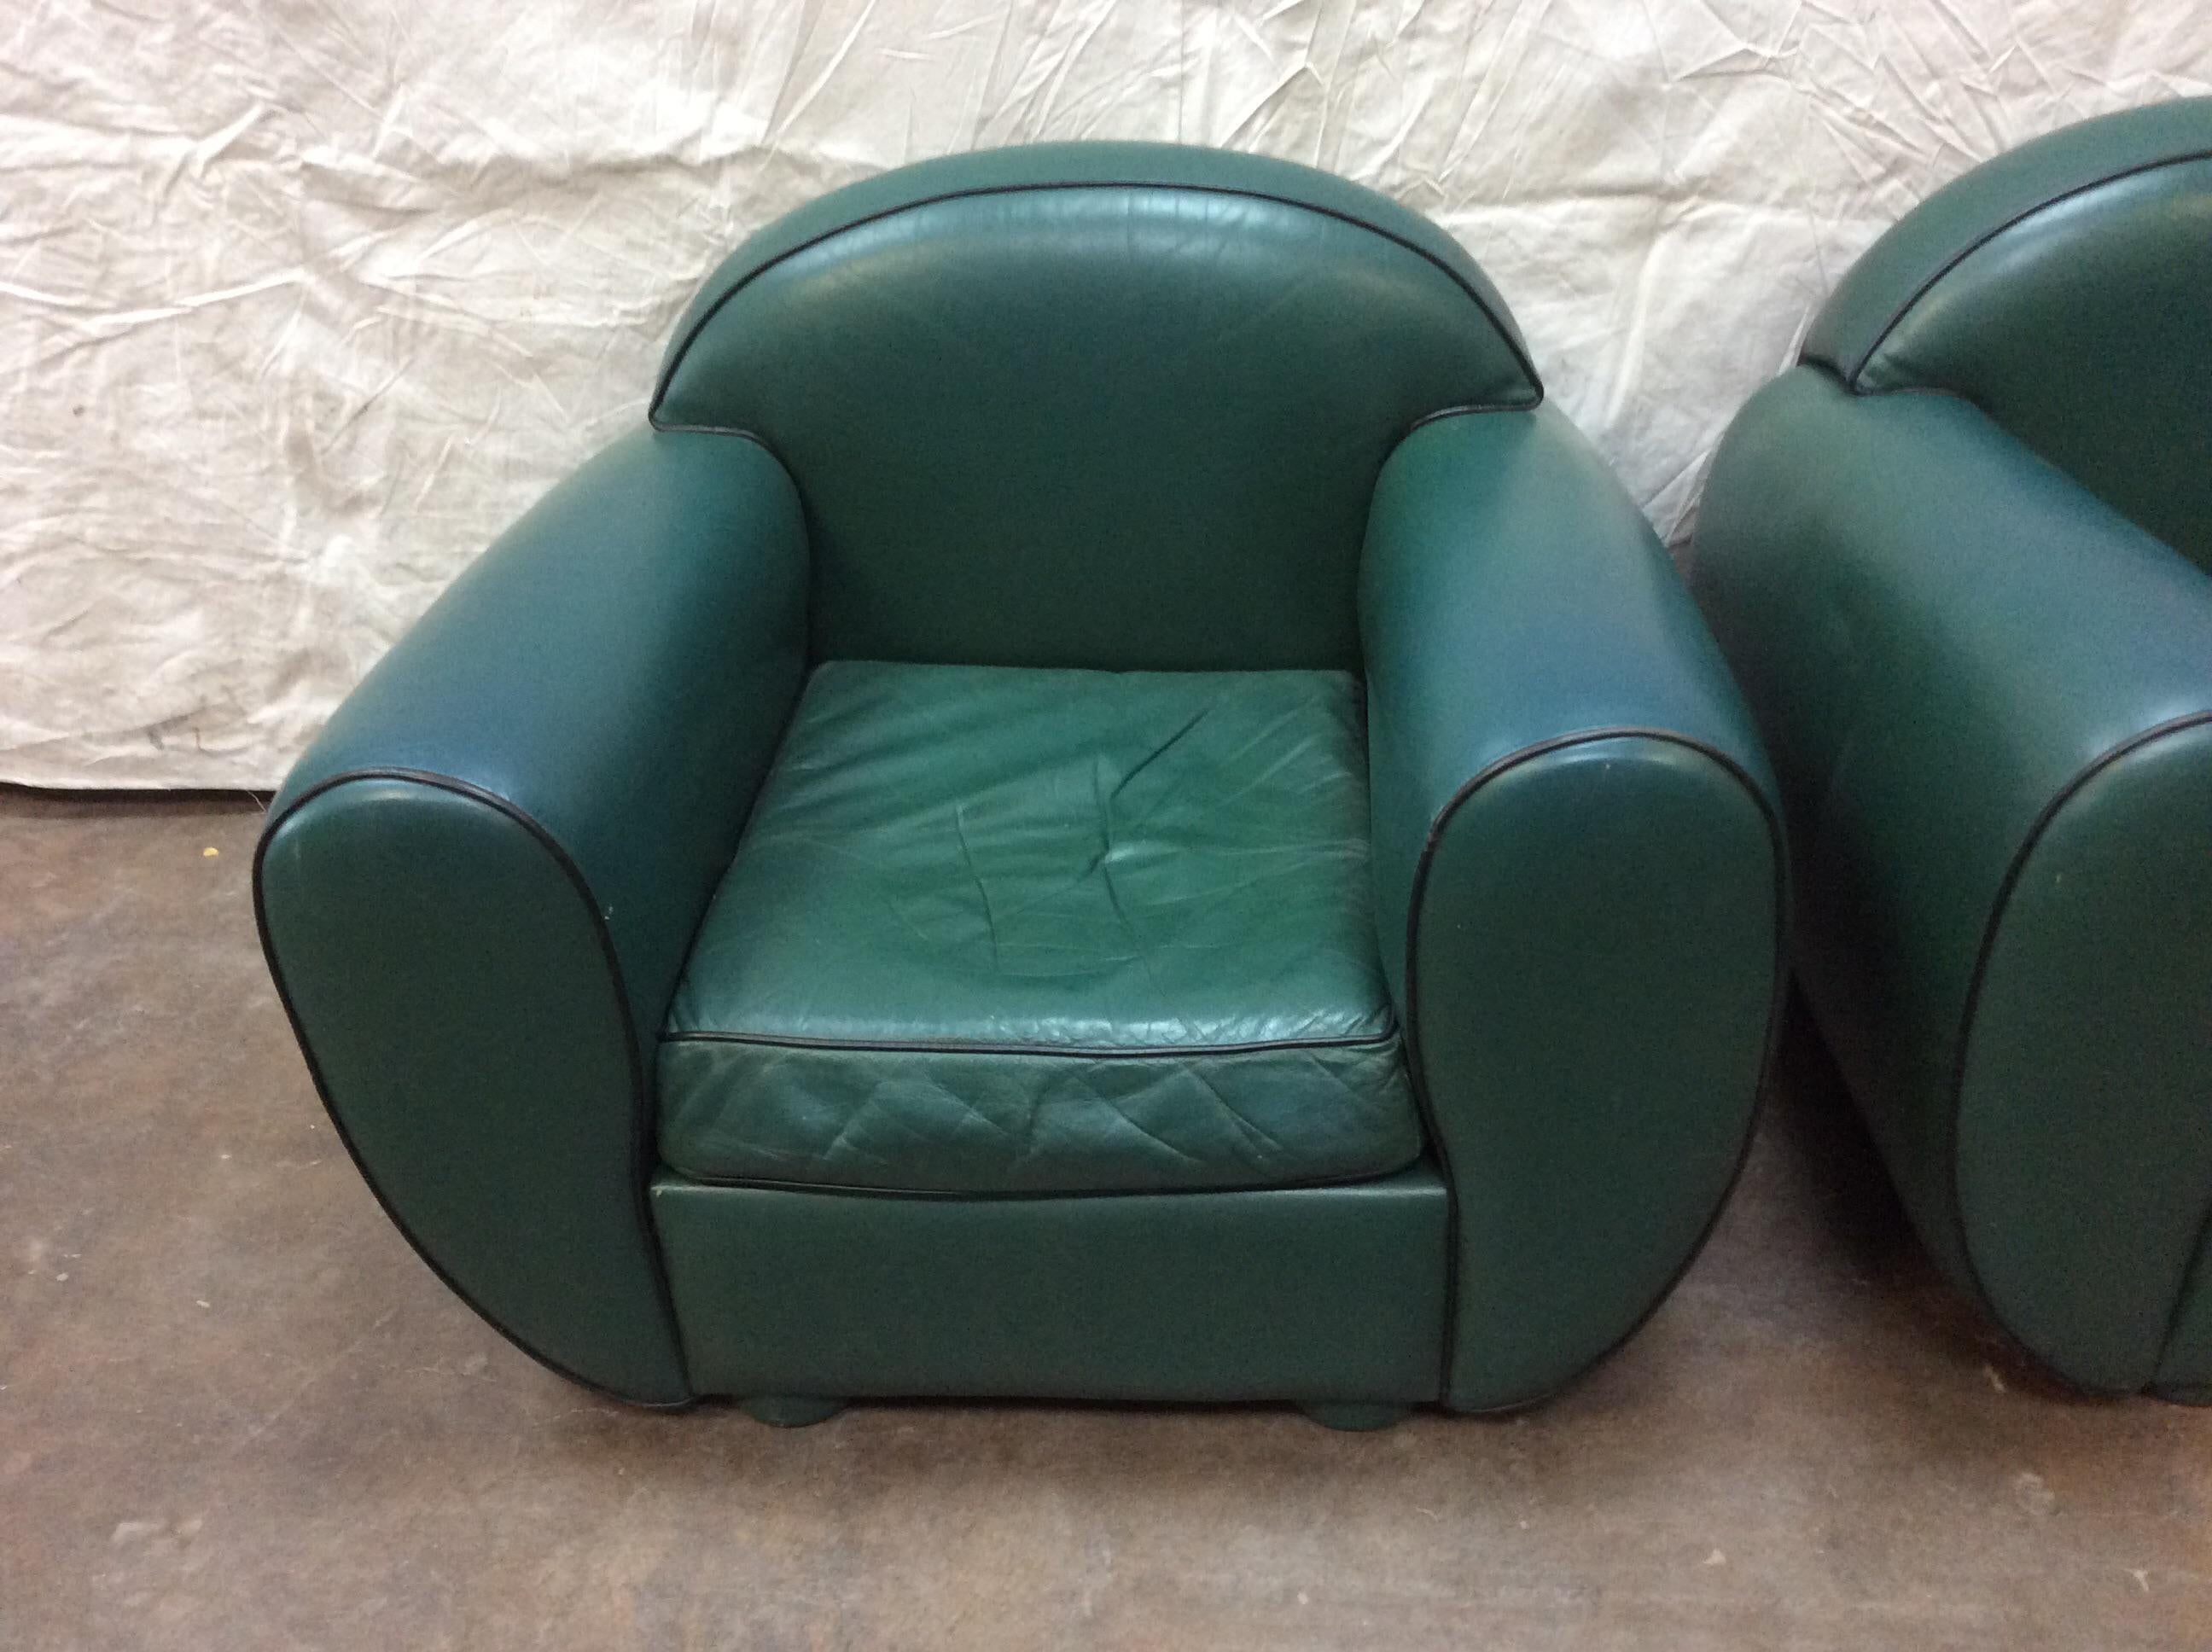 This pair of Art Deco style lounge chairs in green leather were made in Denmark in the 1960's. The chairs feature a well-loved patina with soft leather, the bun feet are also covered in leather.
Stylish and comfortable these chairs will surely add